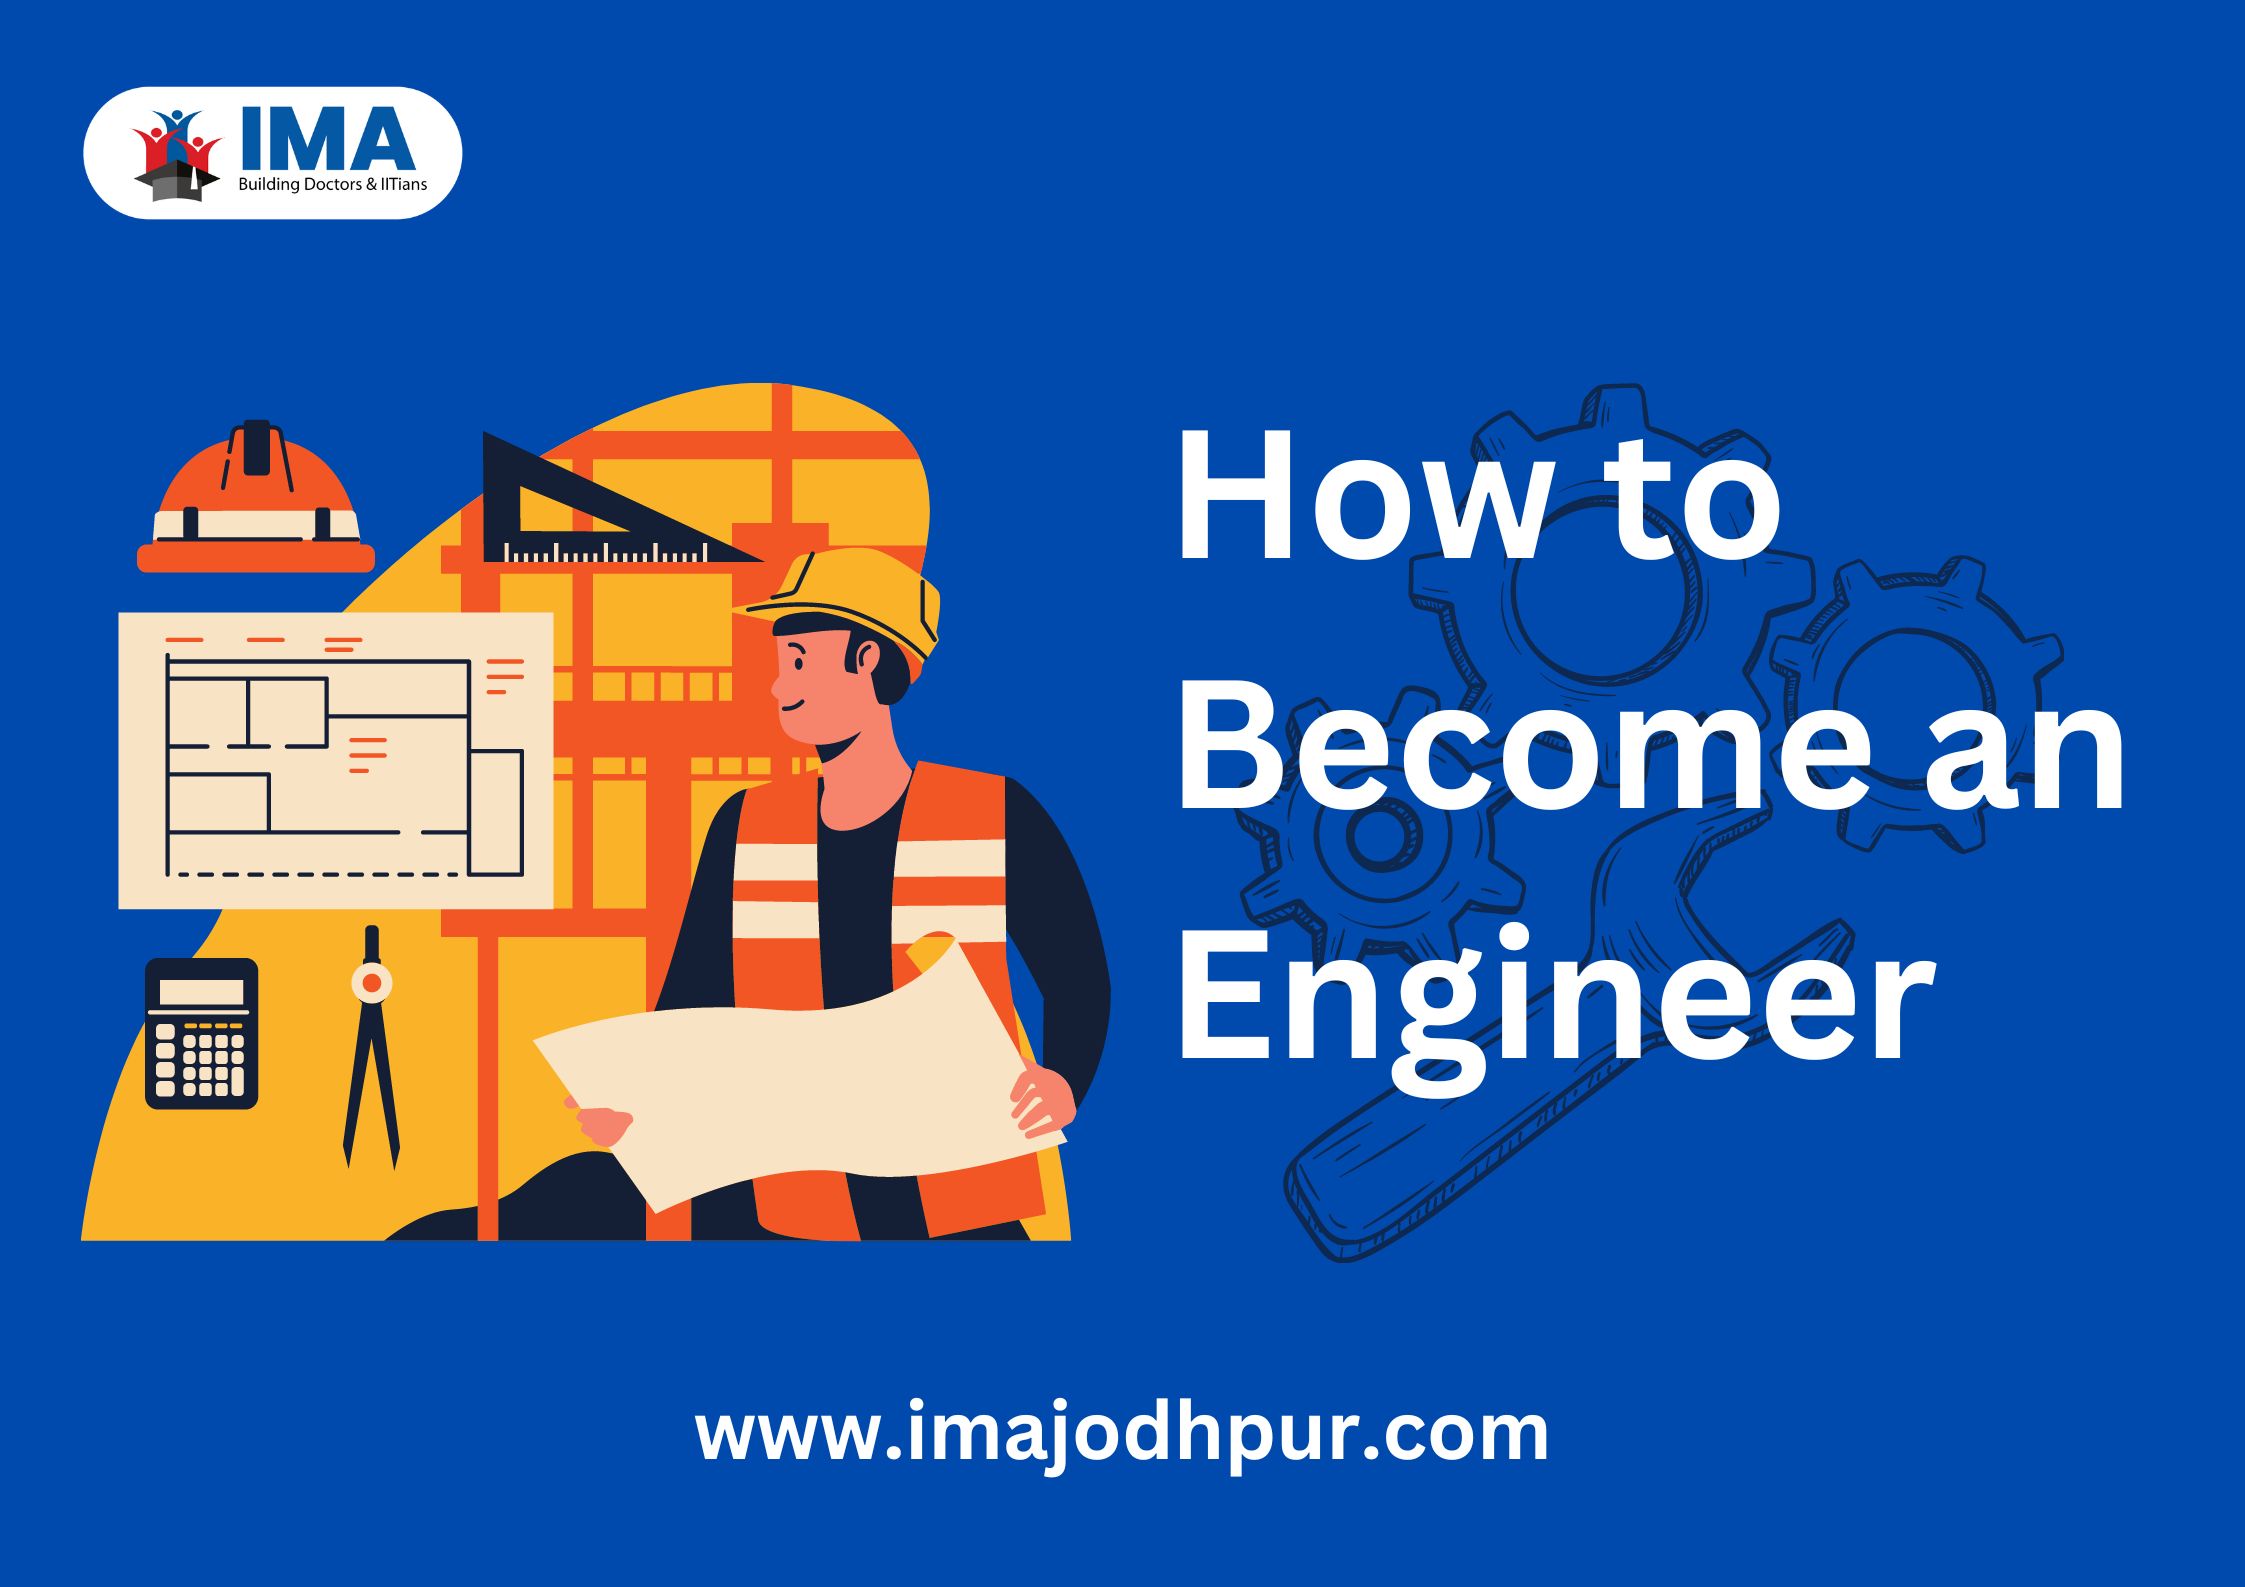 “From student to ENGINEER: Your Step-by-Step Guide”